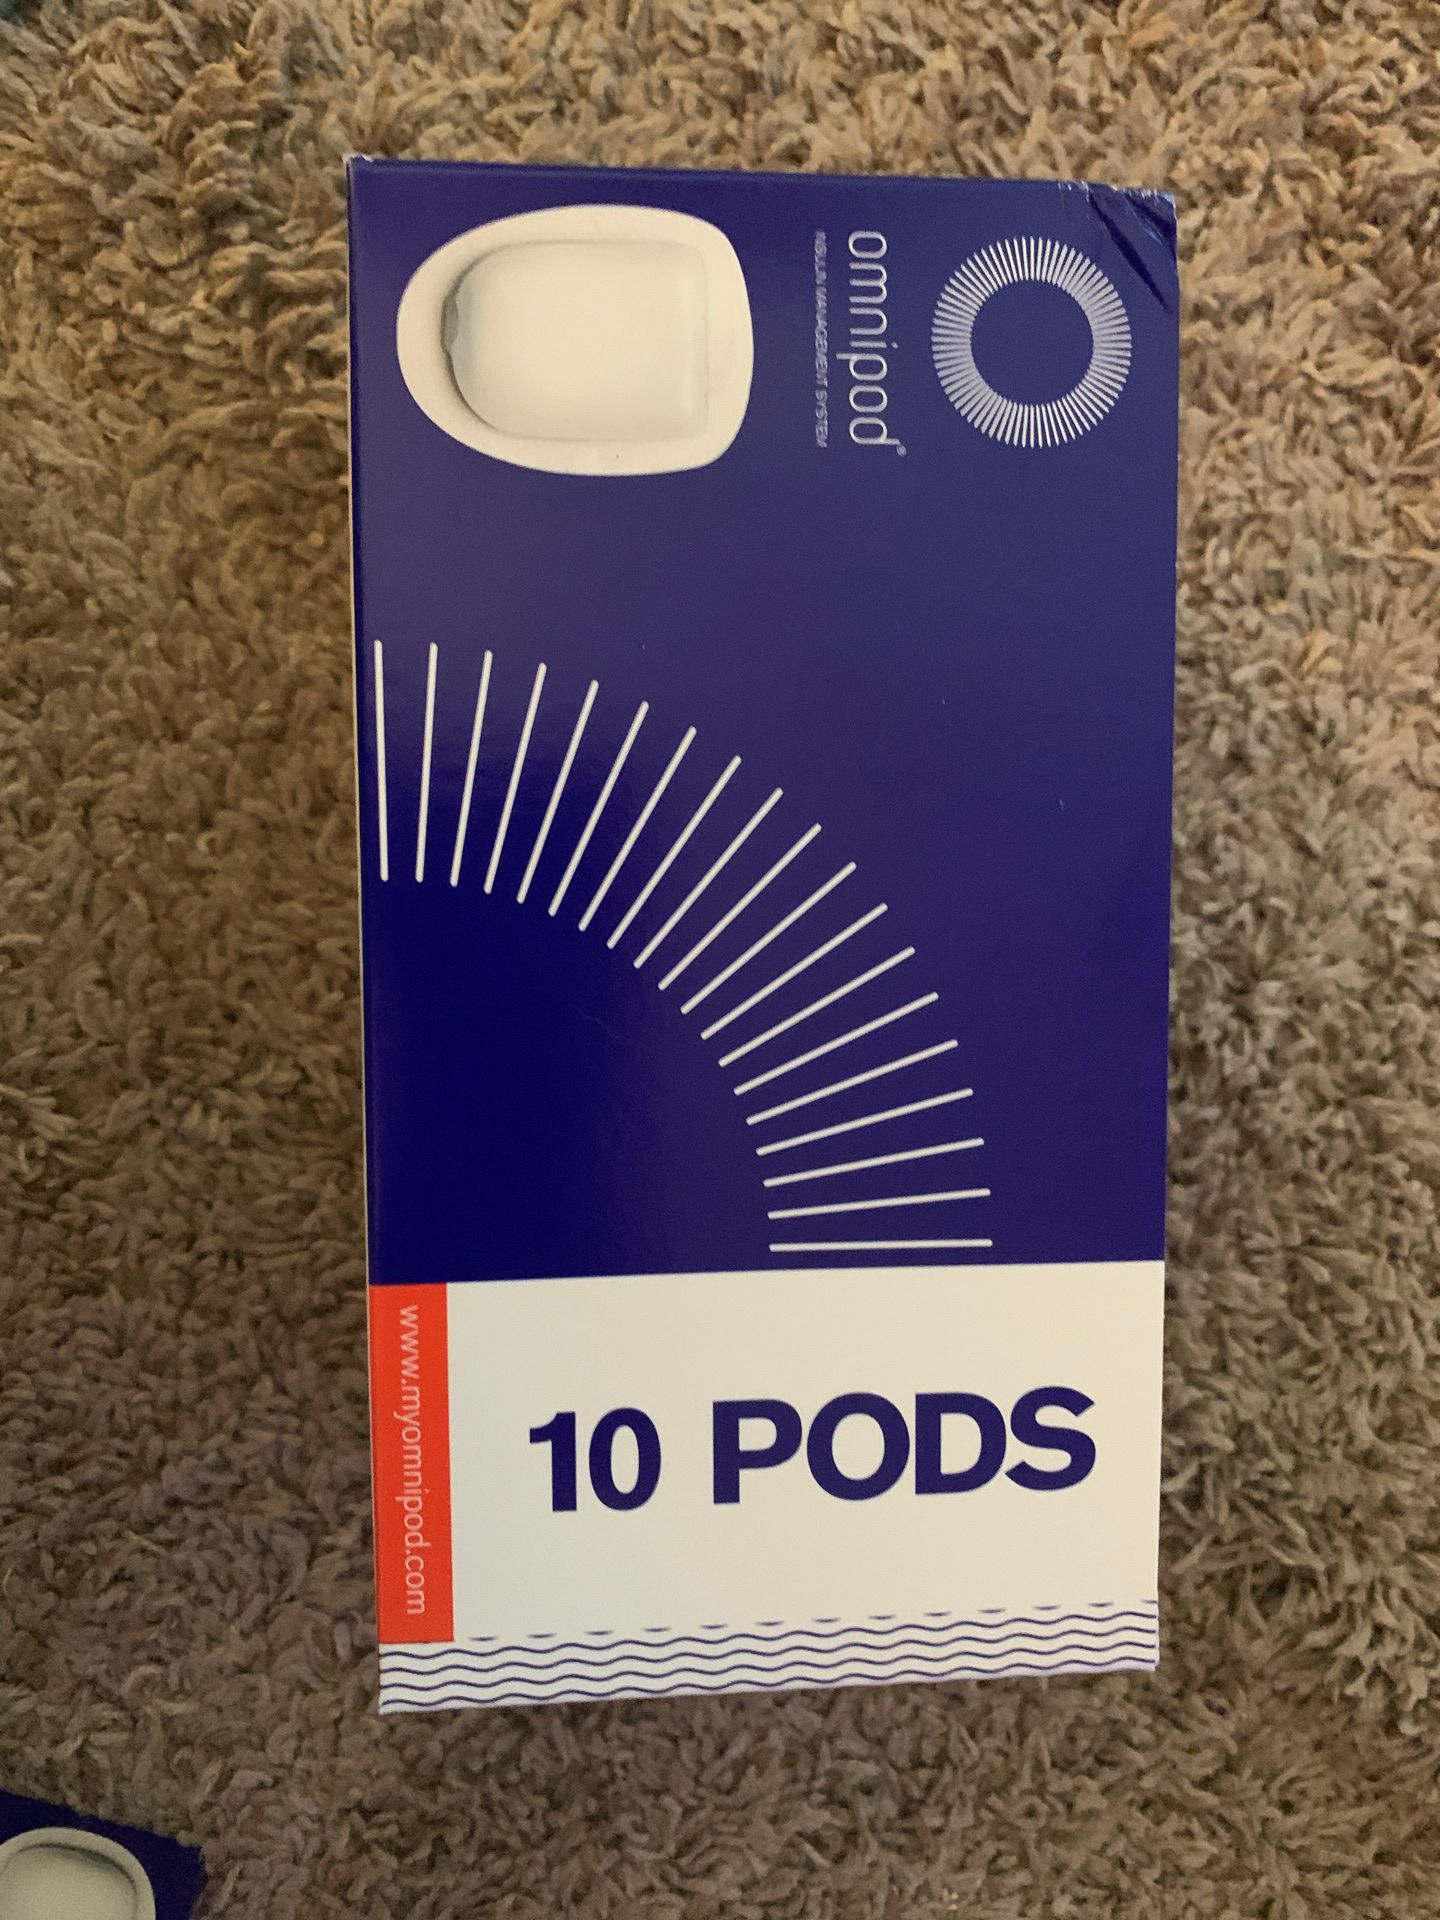 OmniPods